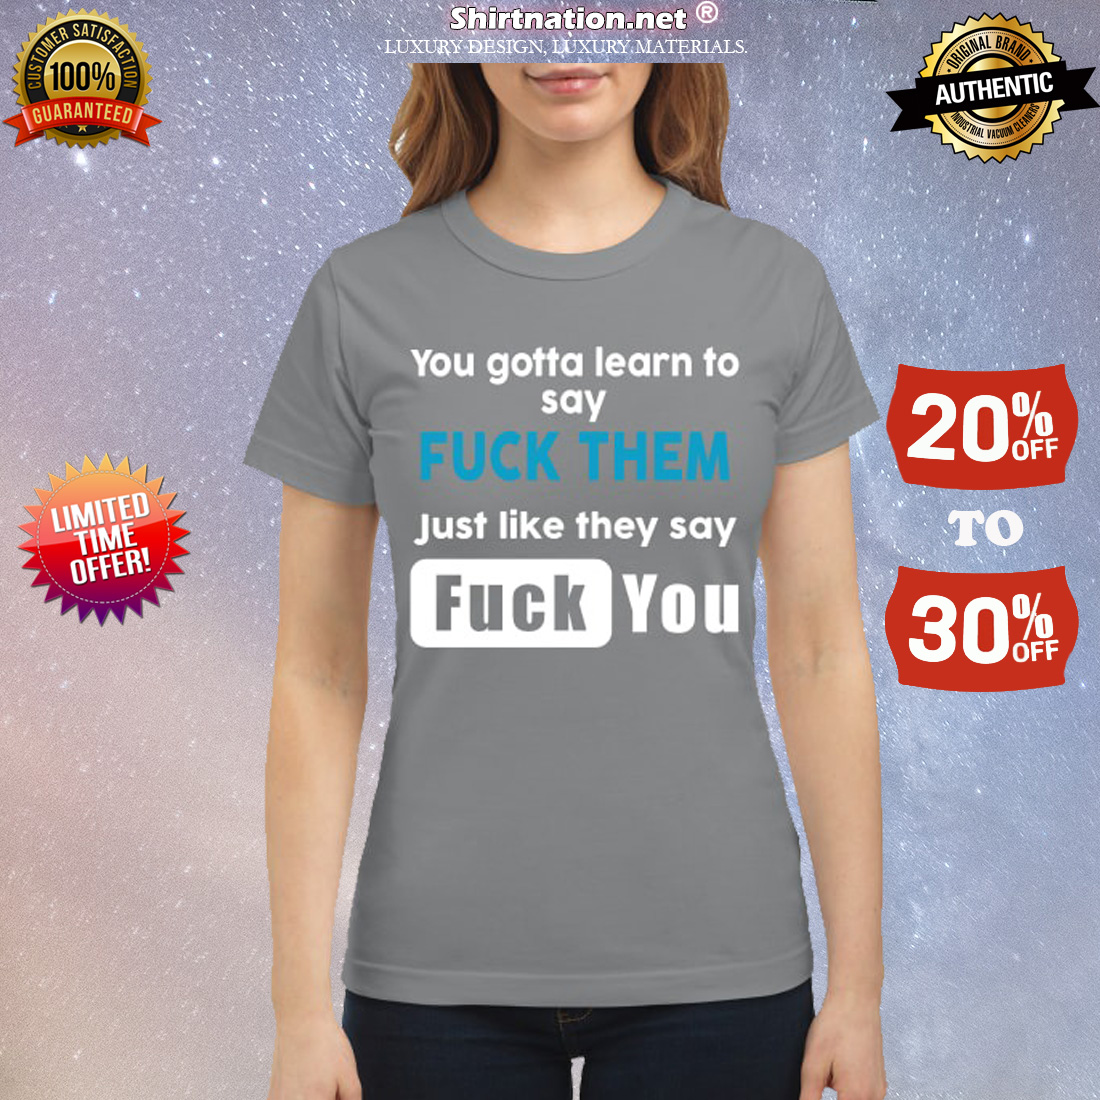 You gotta learn to say fuck them just like they say fuck you classic shirt